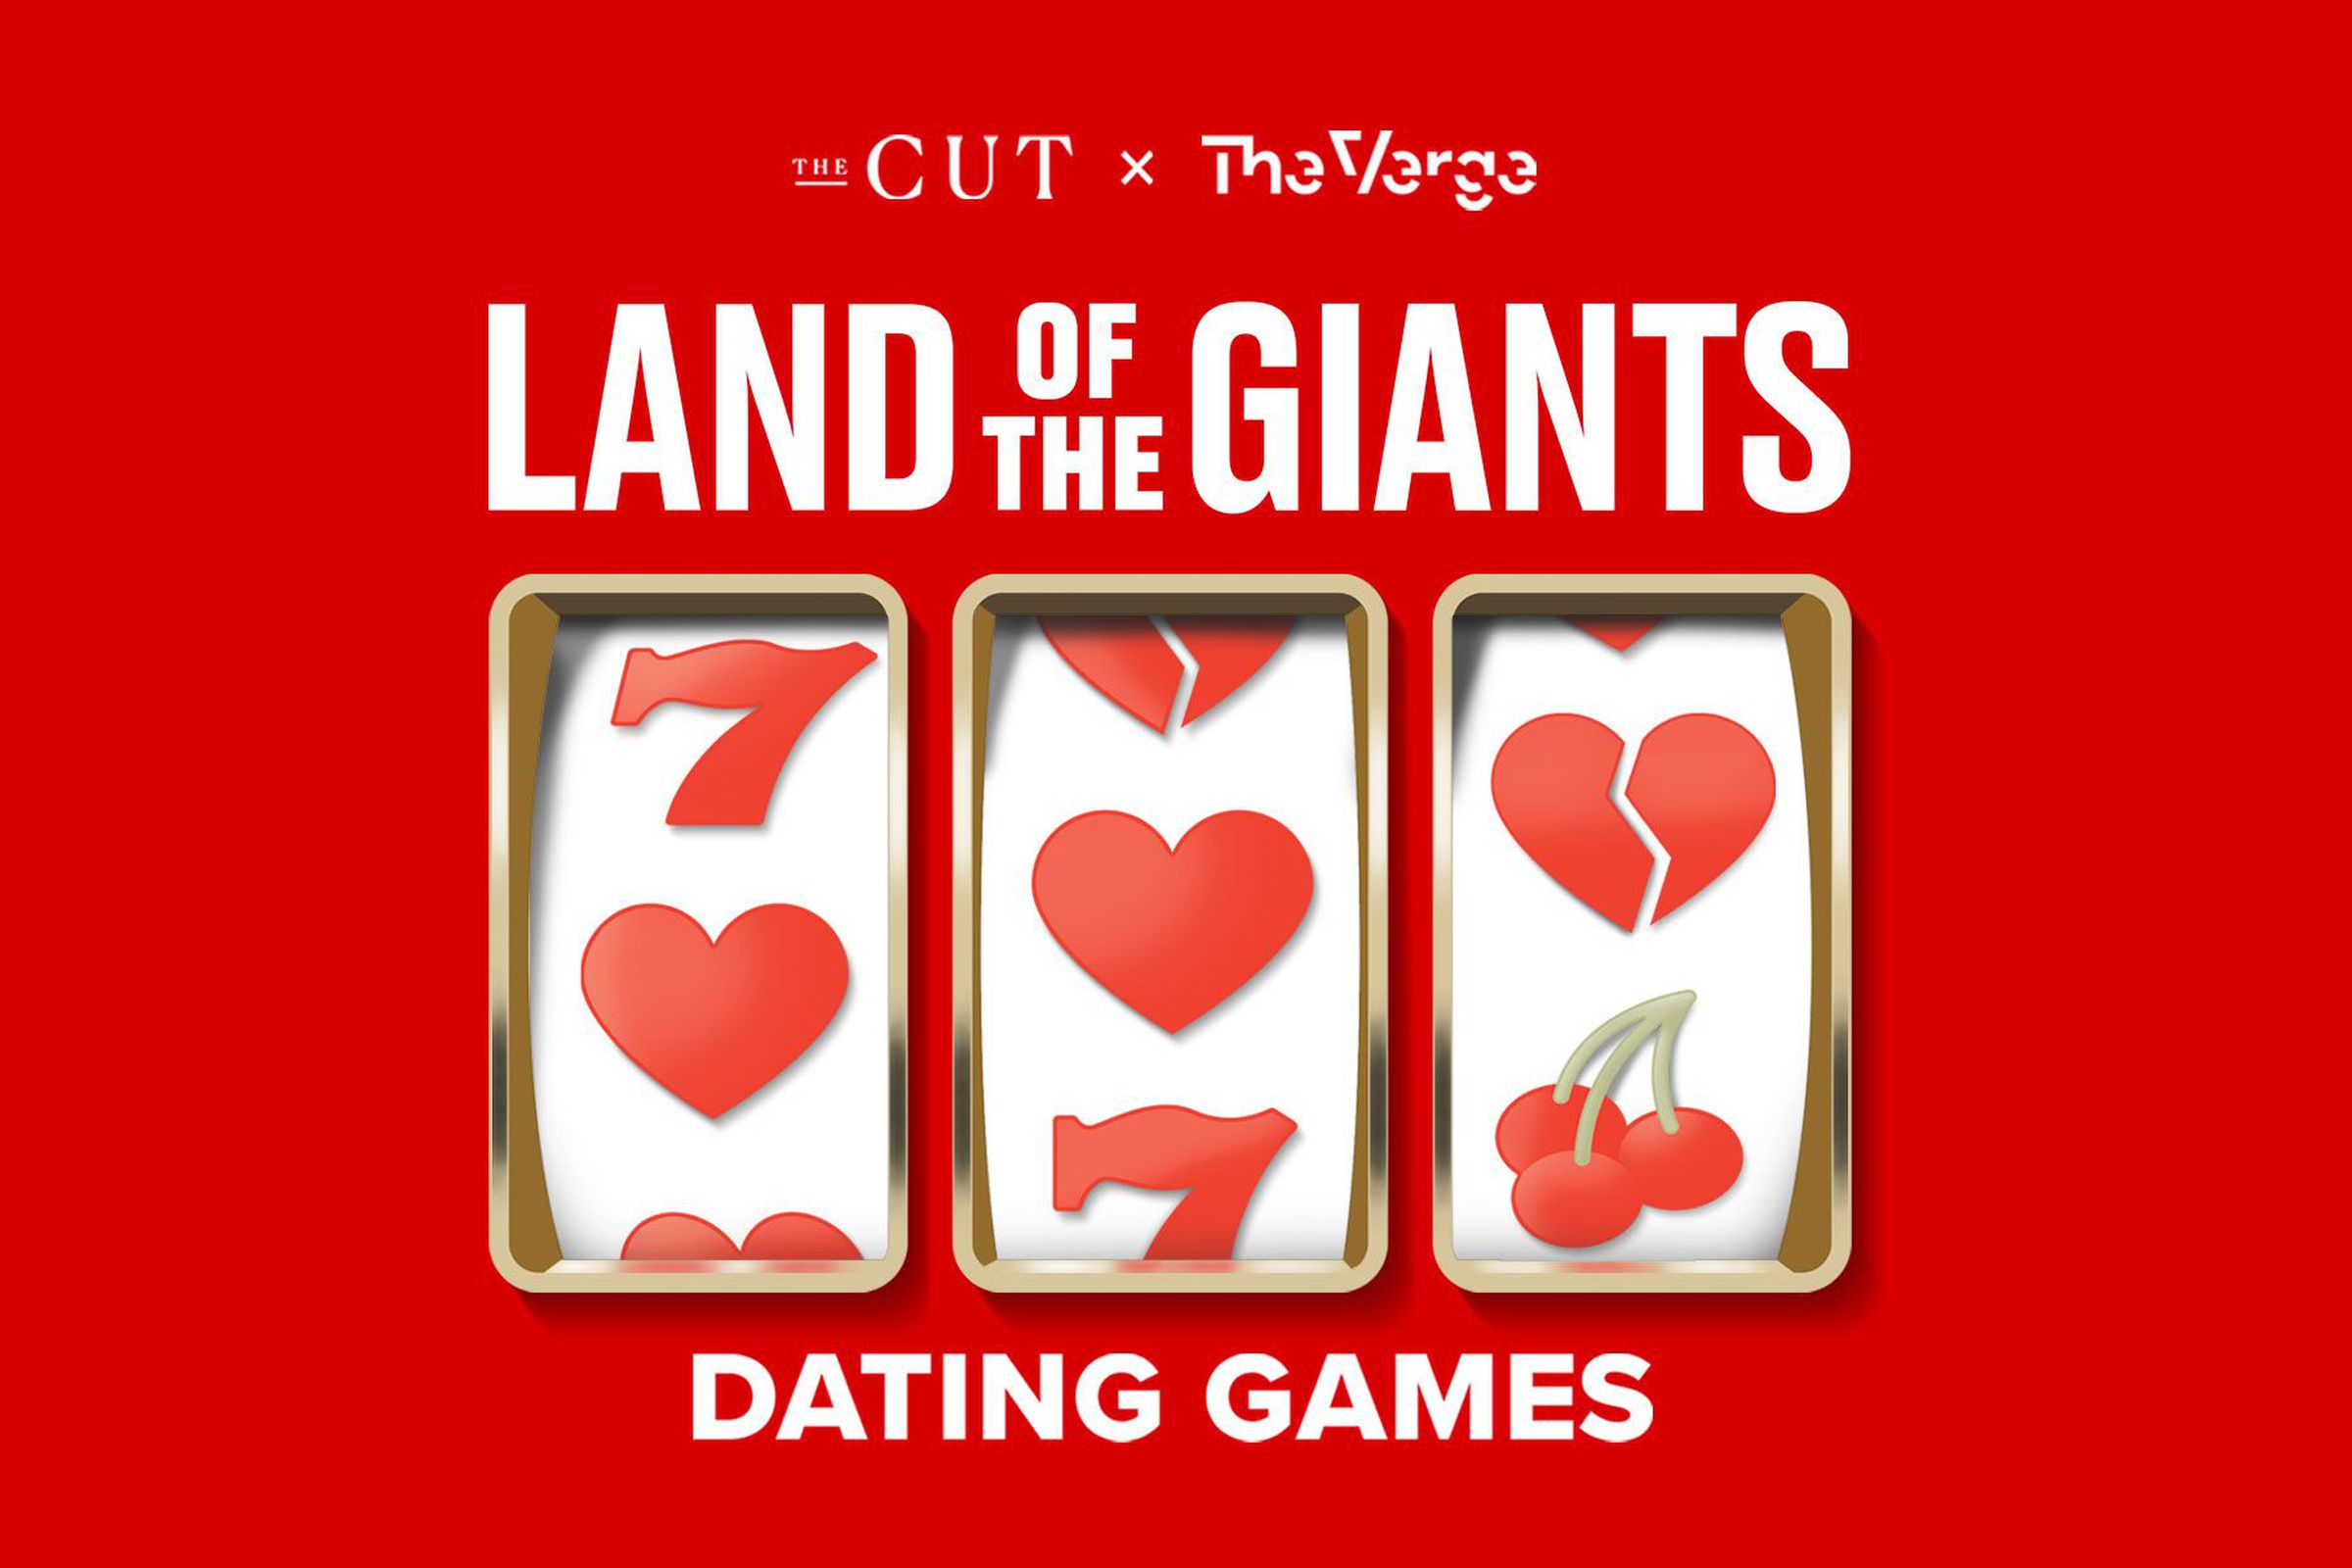 A logo for Land of the Giants: Dating Games, showing the title and imagery of a slot machine with hearts, one of which is broken.